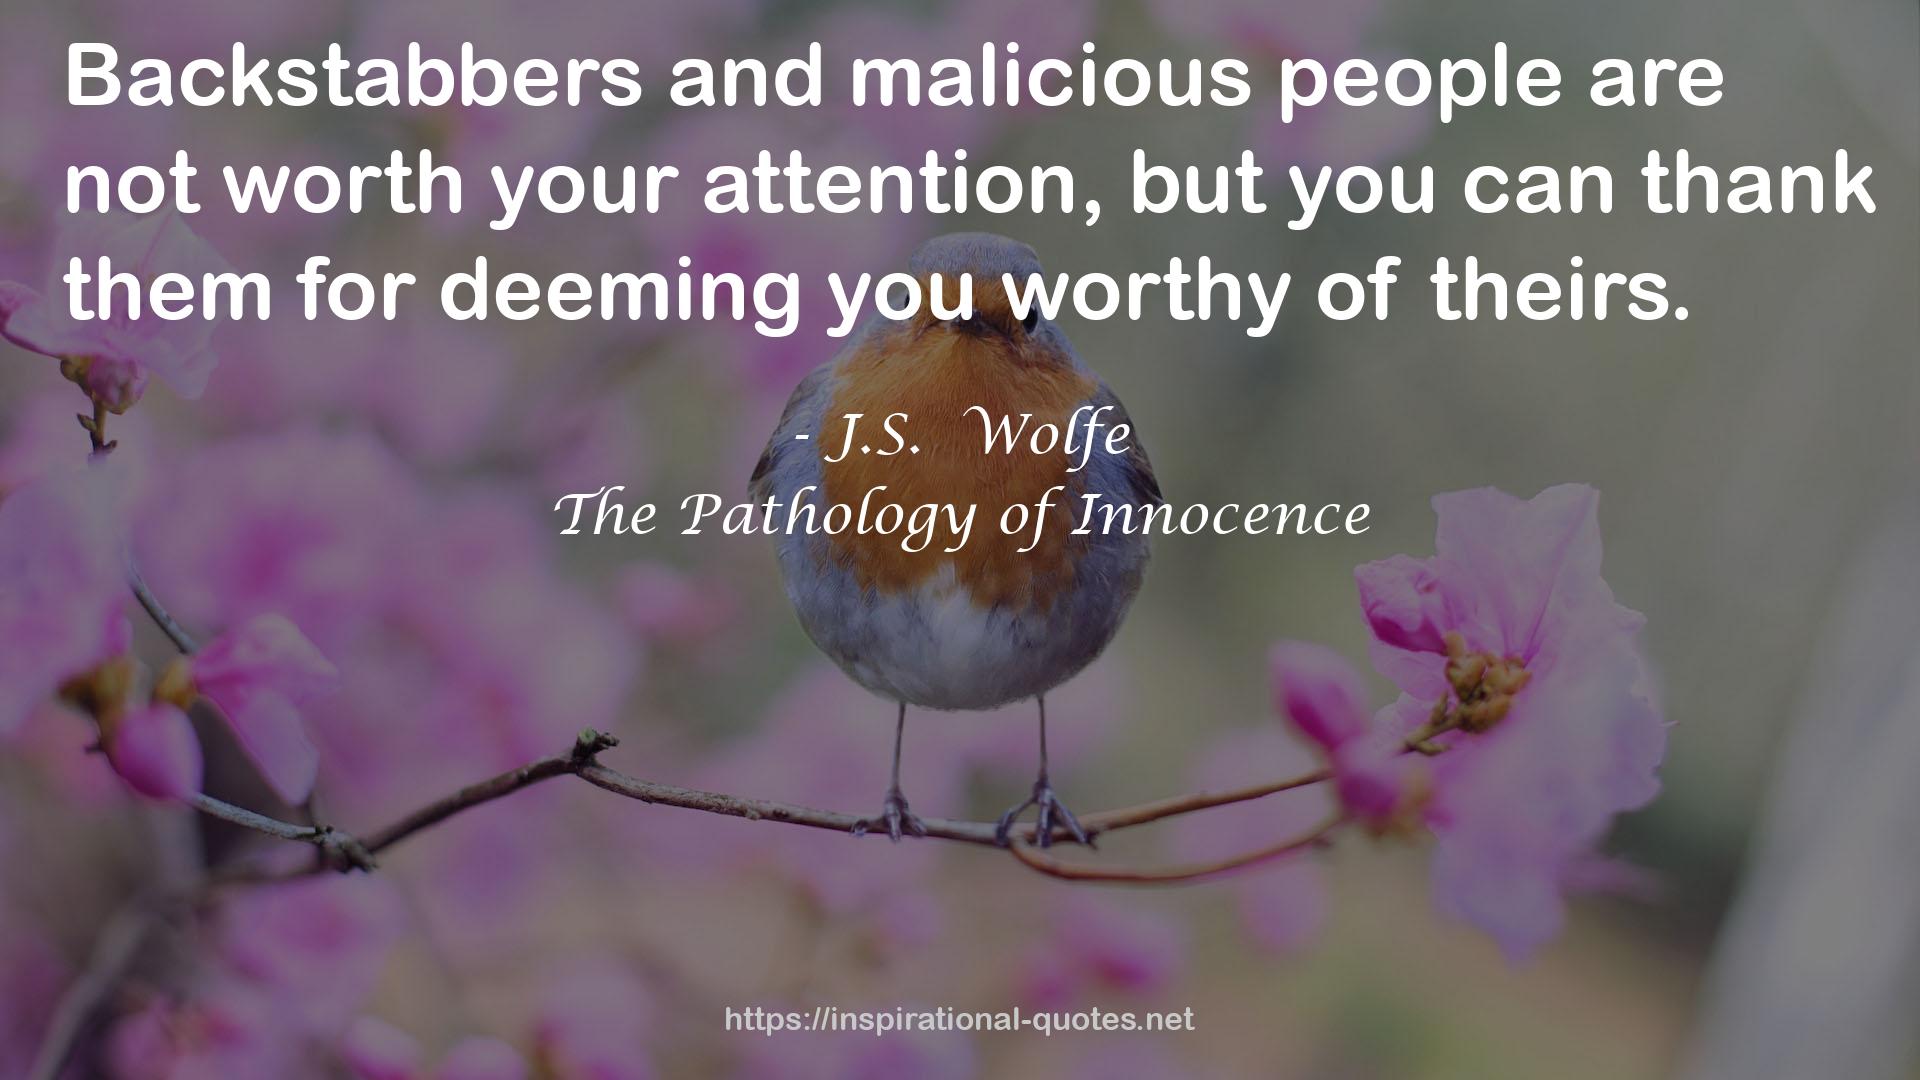 The Pathology of Innocence QUOTES